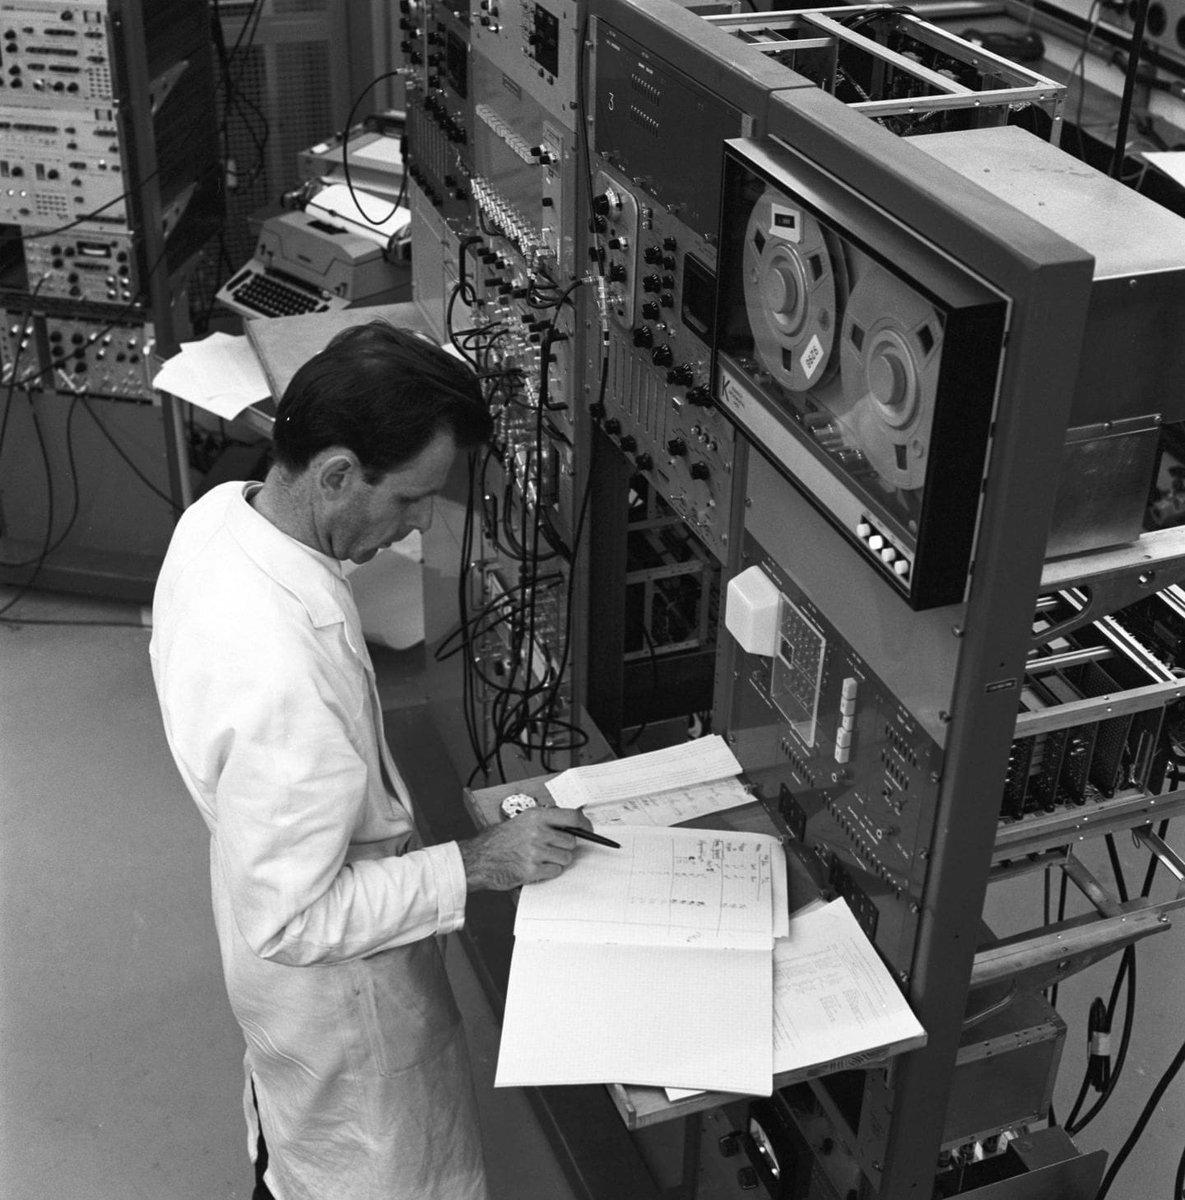 The nucleus as a laboratory
#CERN70 – Part 8

#ThrowbackThursday to the Isotope Separator On-Line (ISOLDE) in 1967.

ISOLDE combined chemical and electromagnetic methods to produce radioactive beams of a single isotope, an innovative technique that made ISOLDE unique in the world…